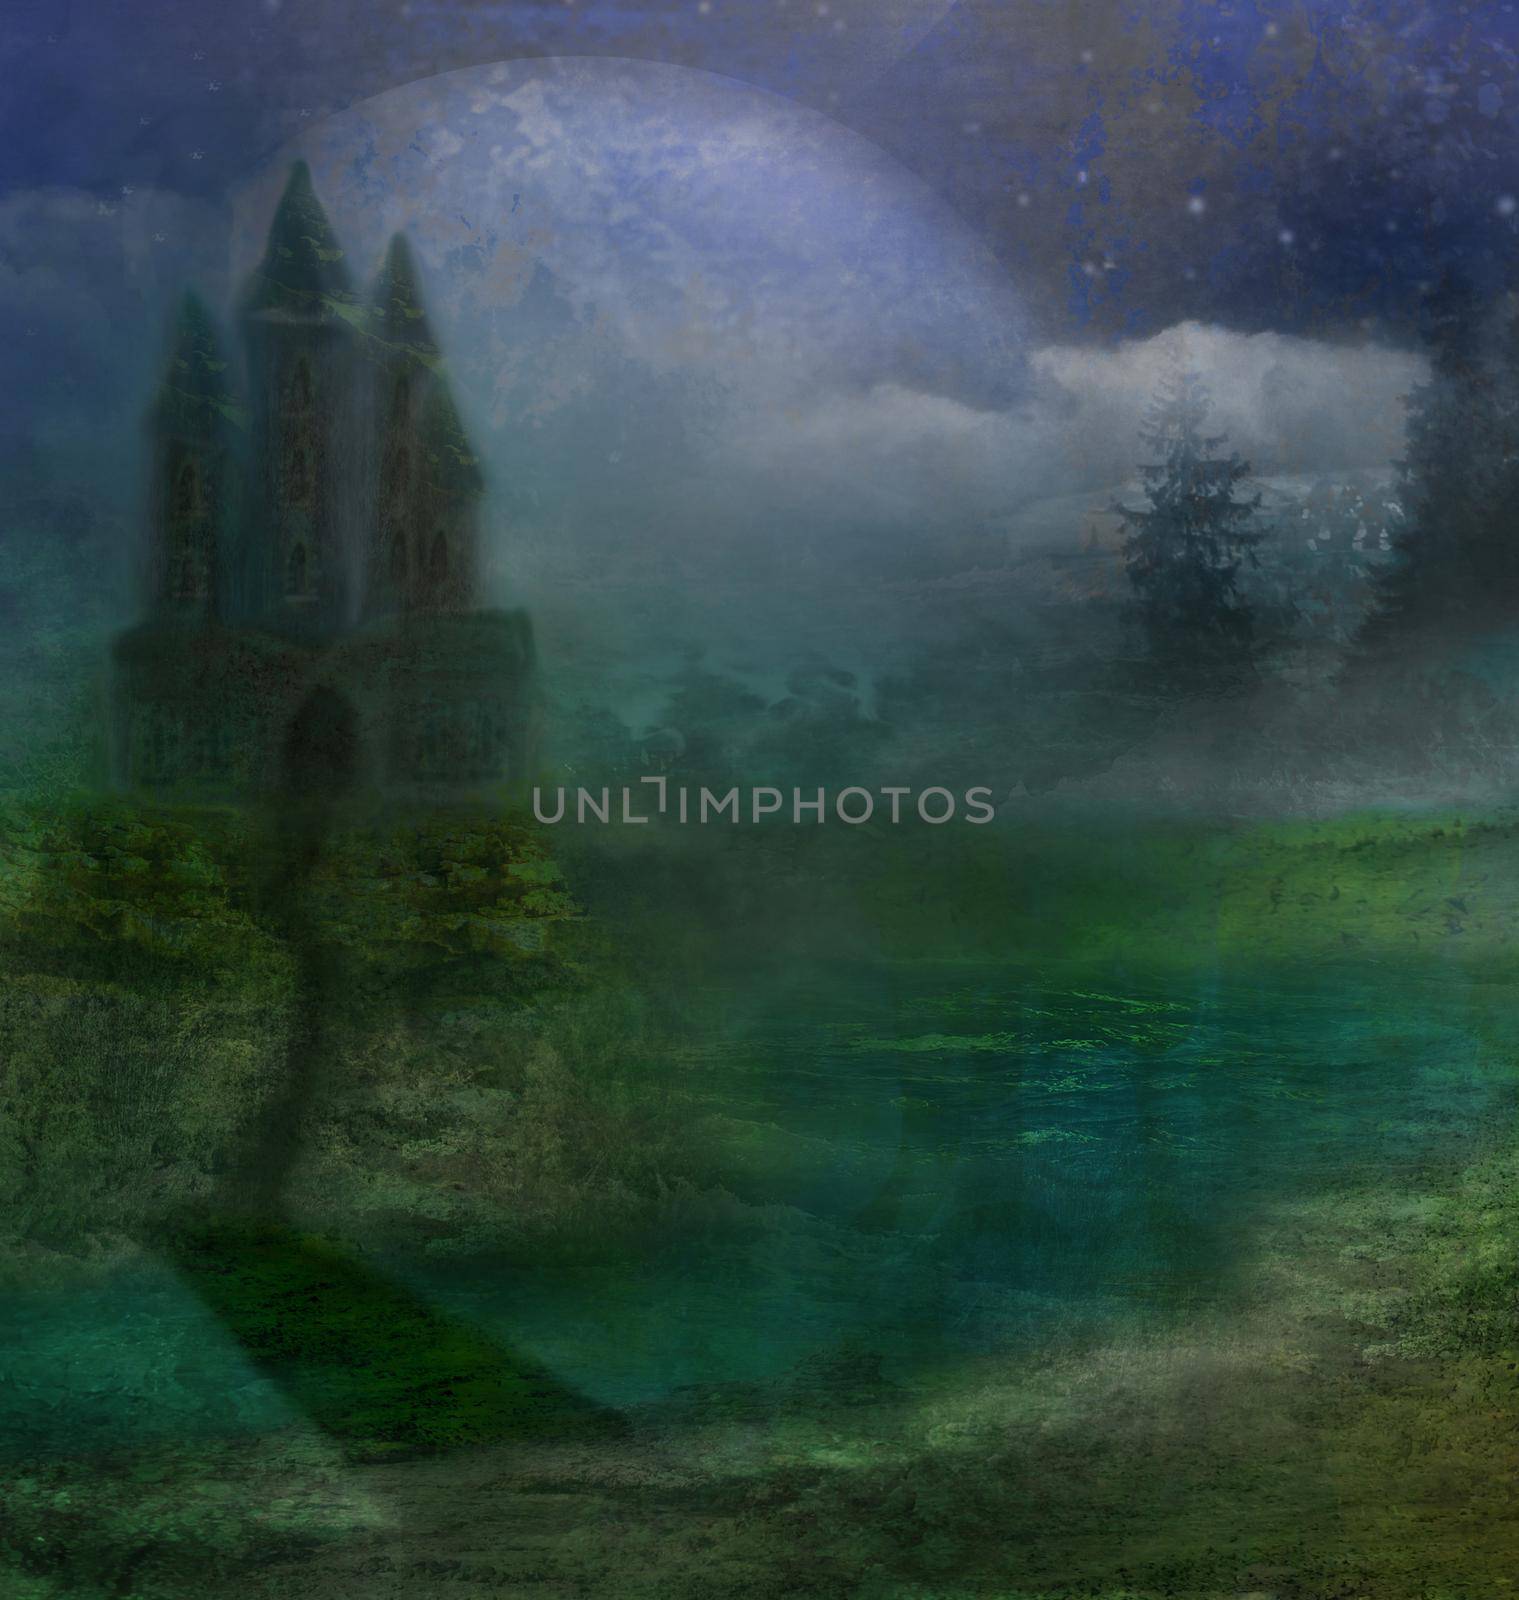 abstract landscape with old castle and moon by JackyBrown